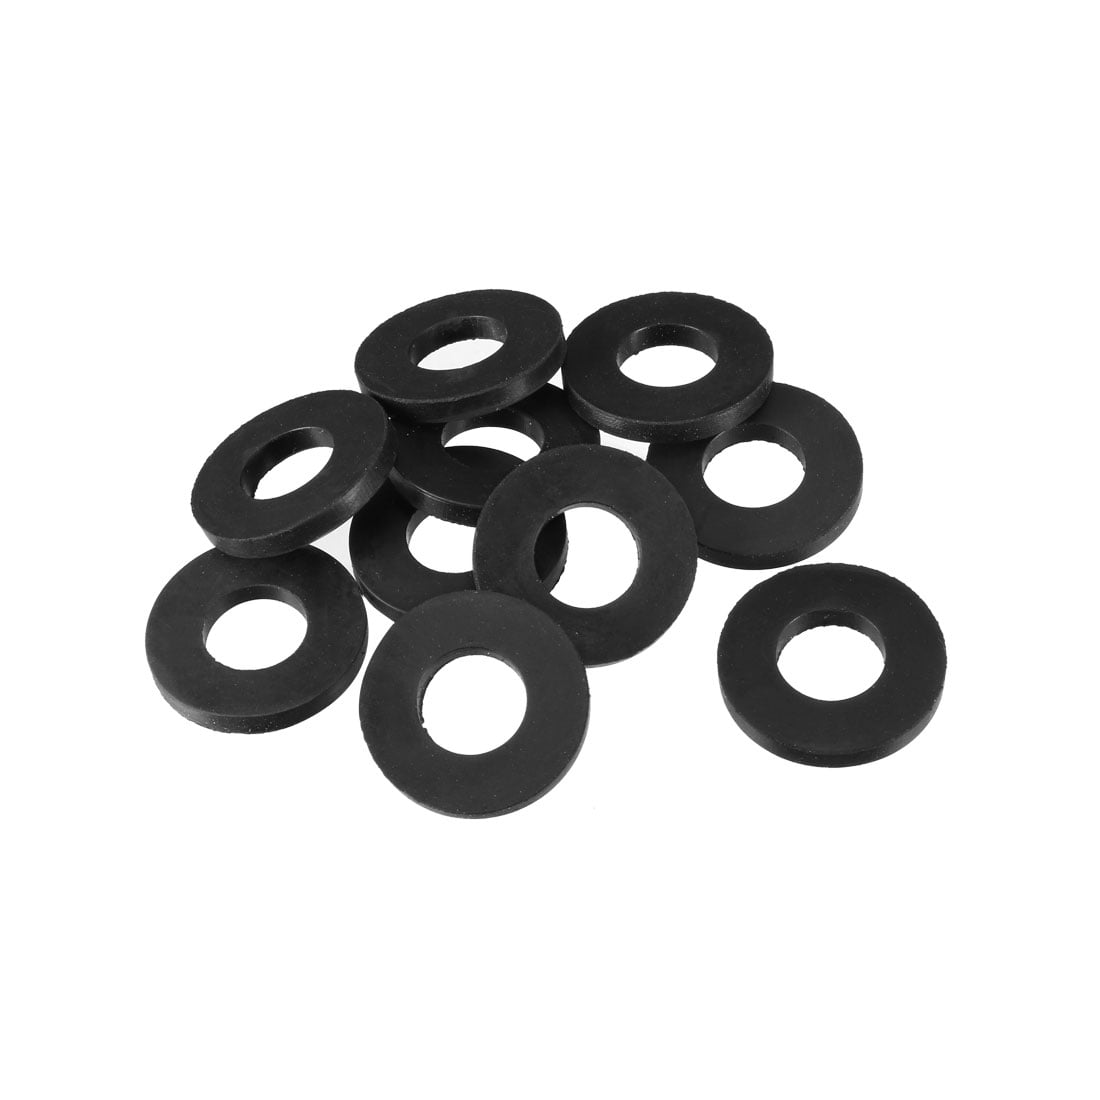 M2 Details about   140mm x 155mm x 3mm O-Ring Hose Gasket Silicone Washer 